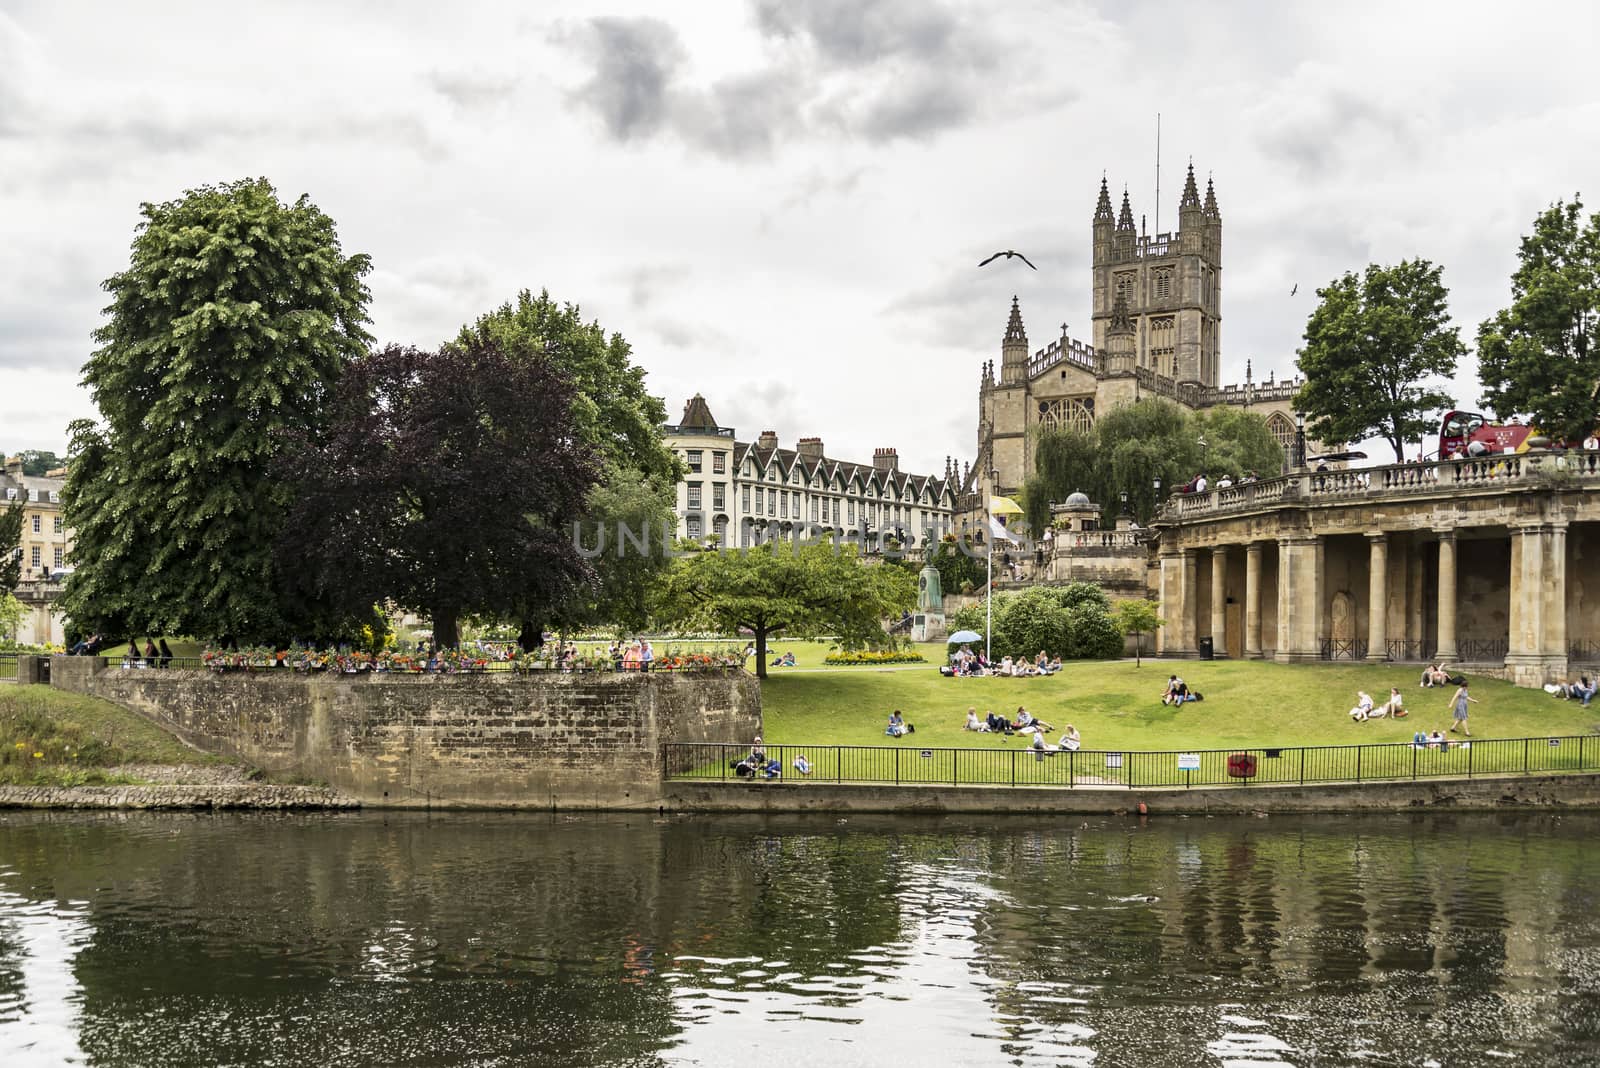 BATH - JULY 18: View of the Empire Hotel on River Avon on July 18, 2015 in Bath, England